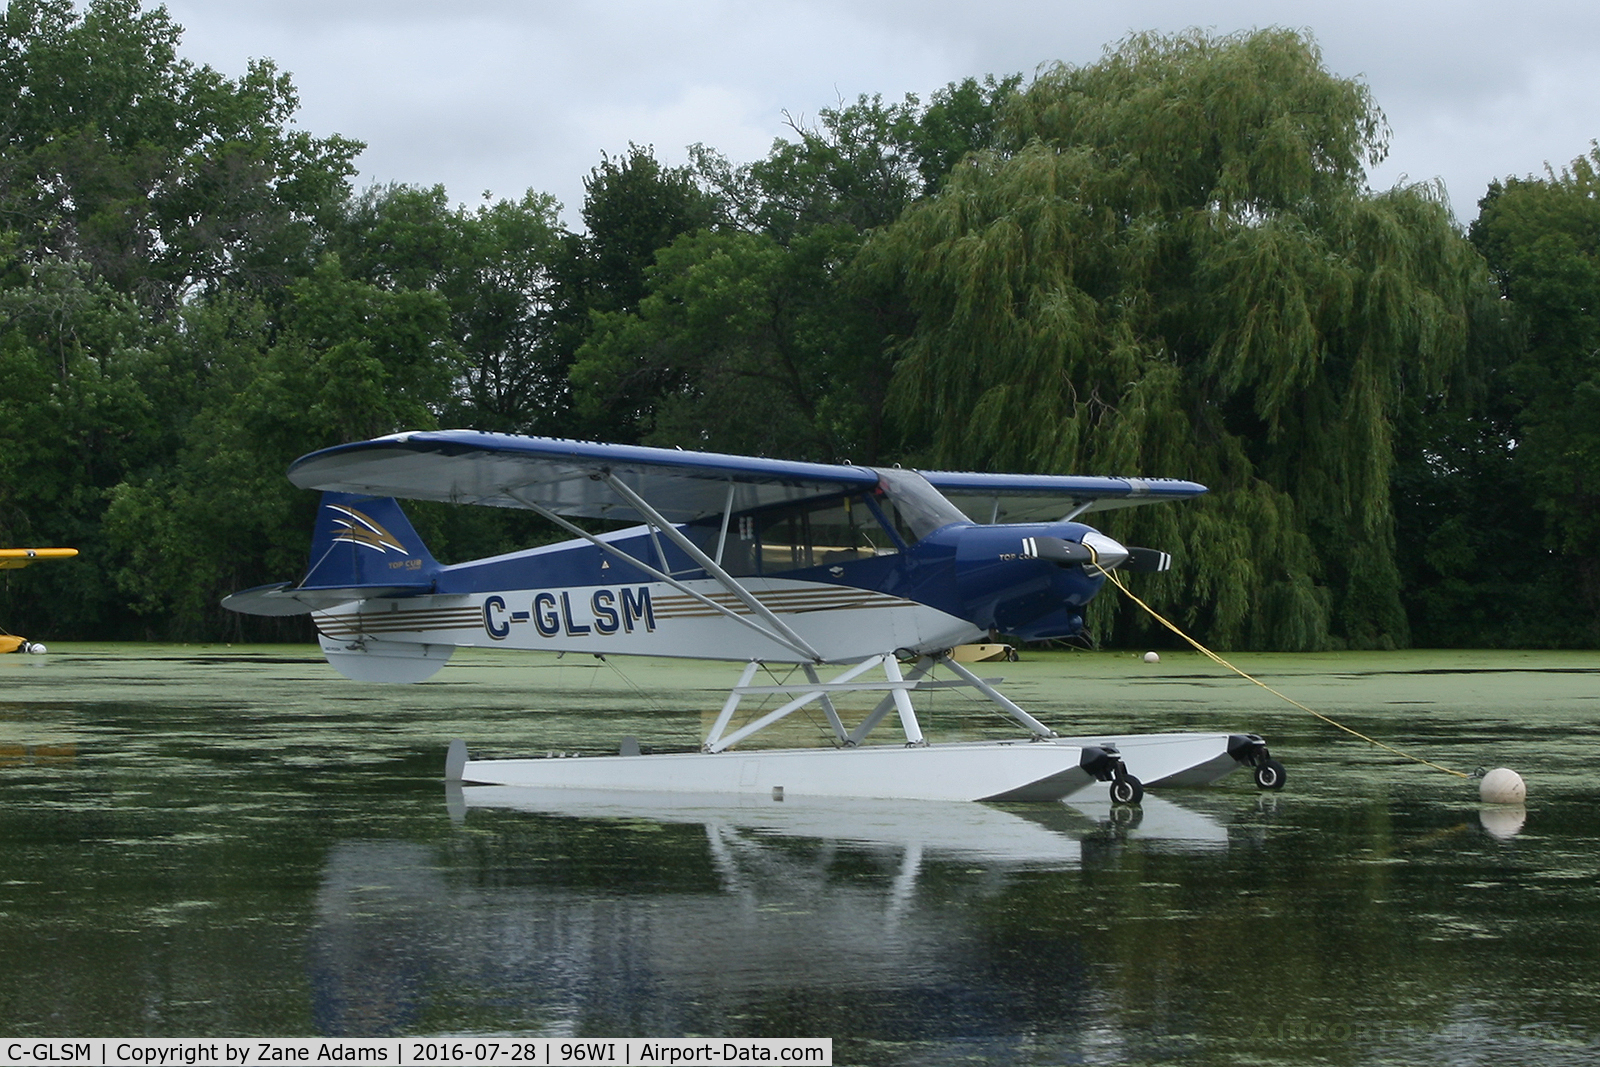 C-GLSM, 2009 Cub Crafters CC18-180 Top Club C/N CC18-0037, At the 2016 EAA AirVenture - Oshkosh, Wisconsin